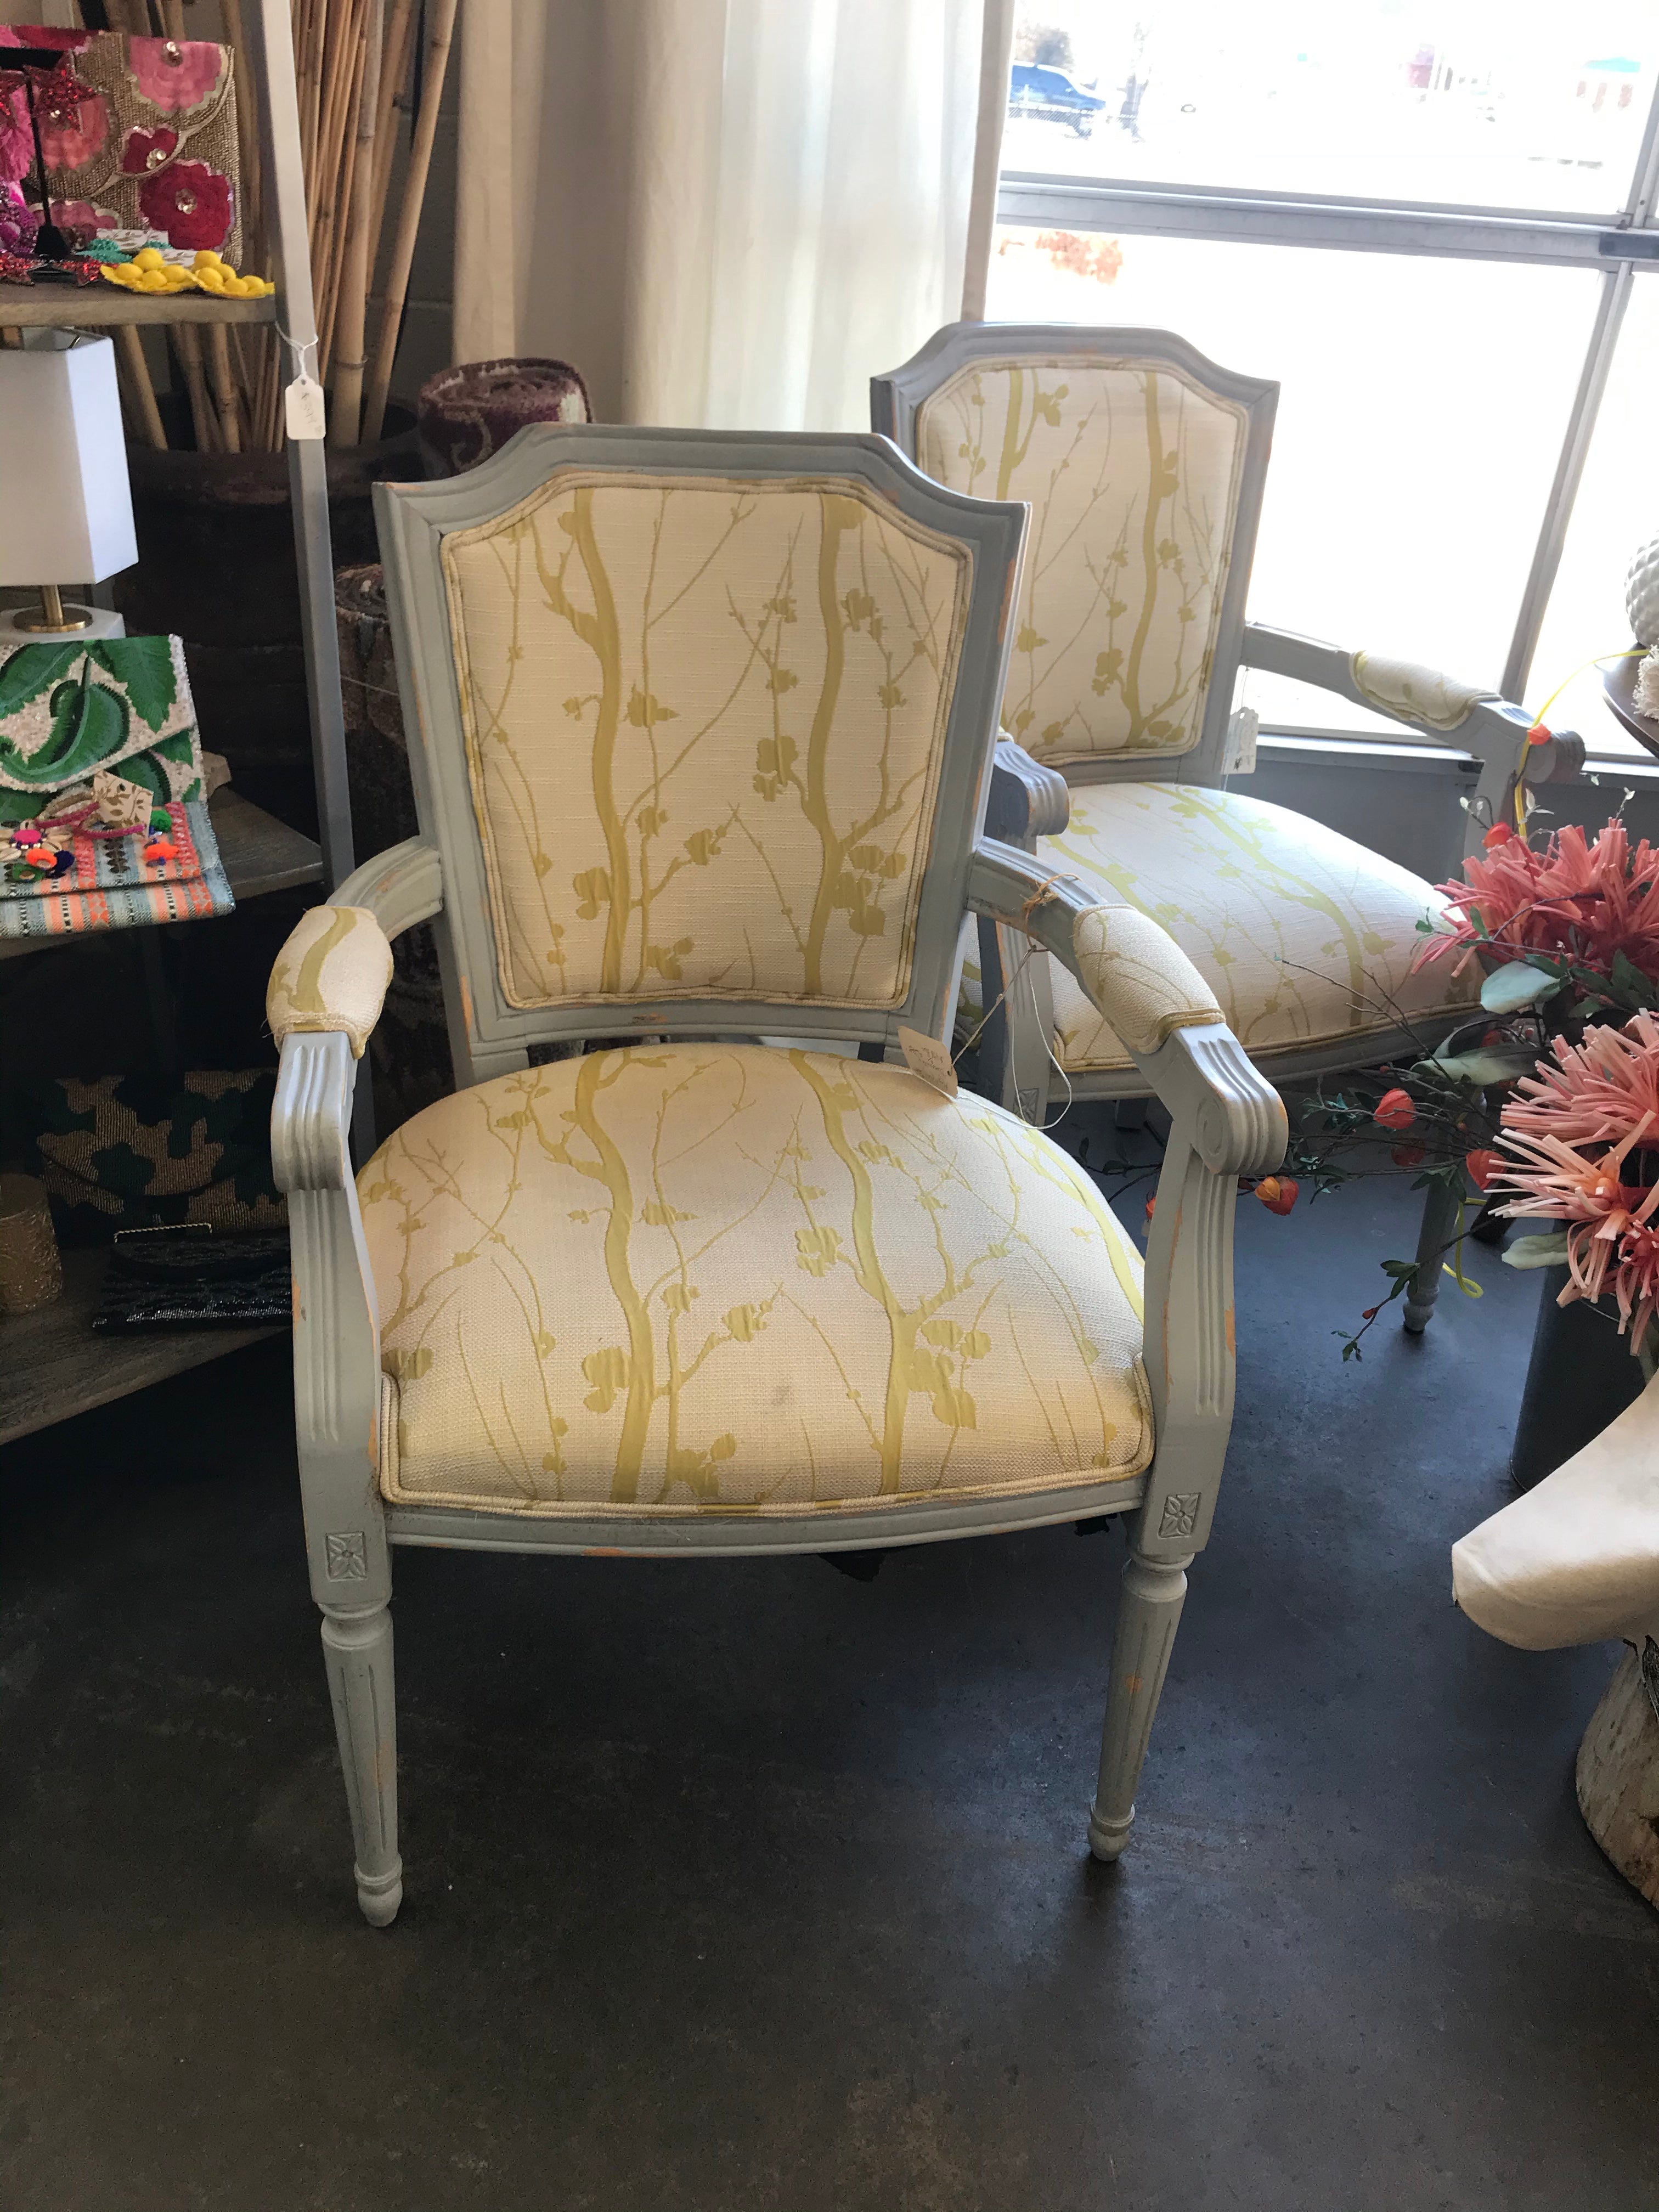 Gray and light yellow distressed chairs